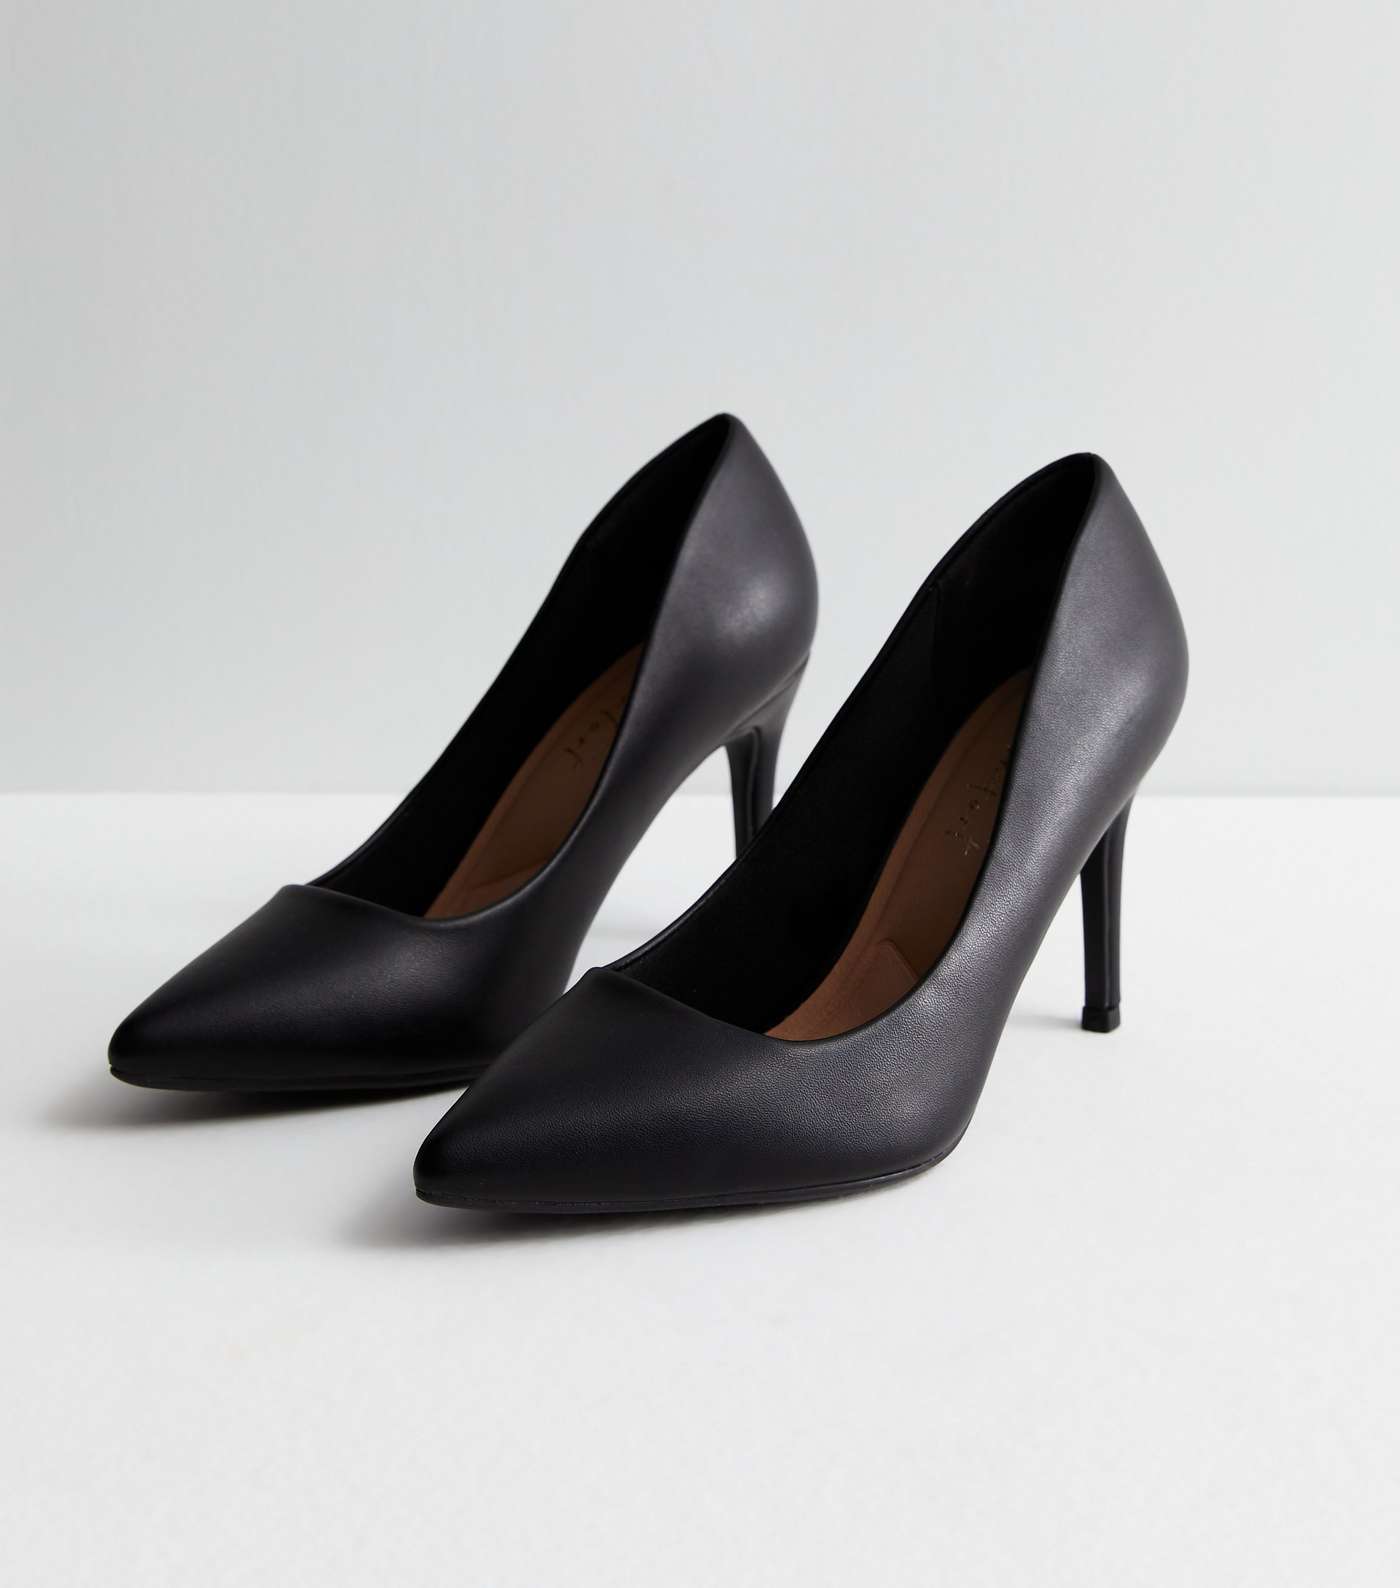 Black Leather-Look Stiletto Heel Court Shoes Image 2